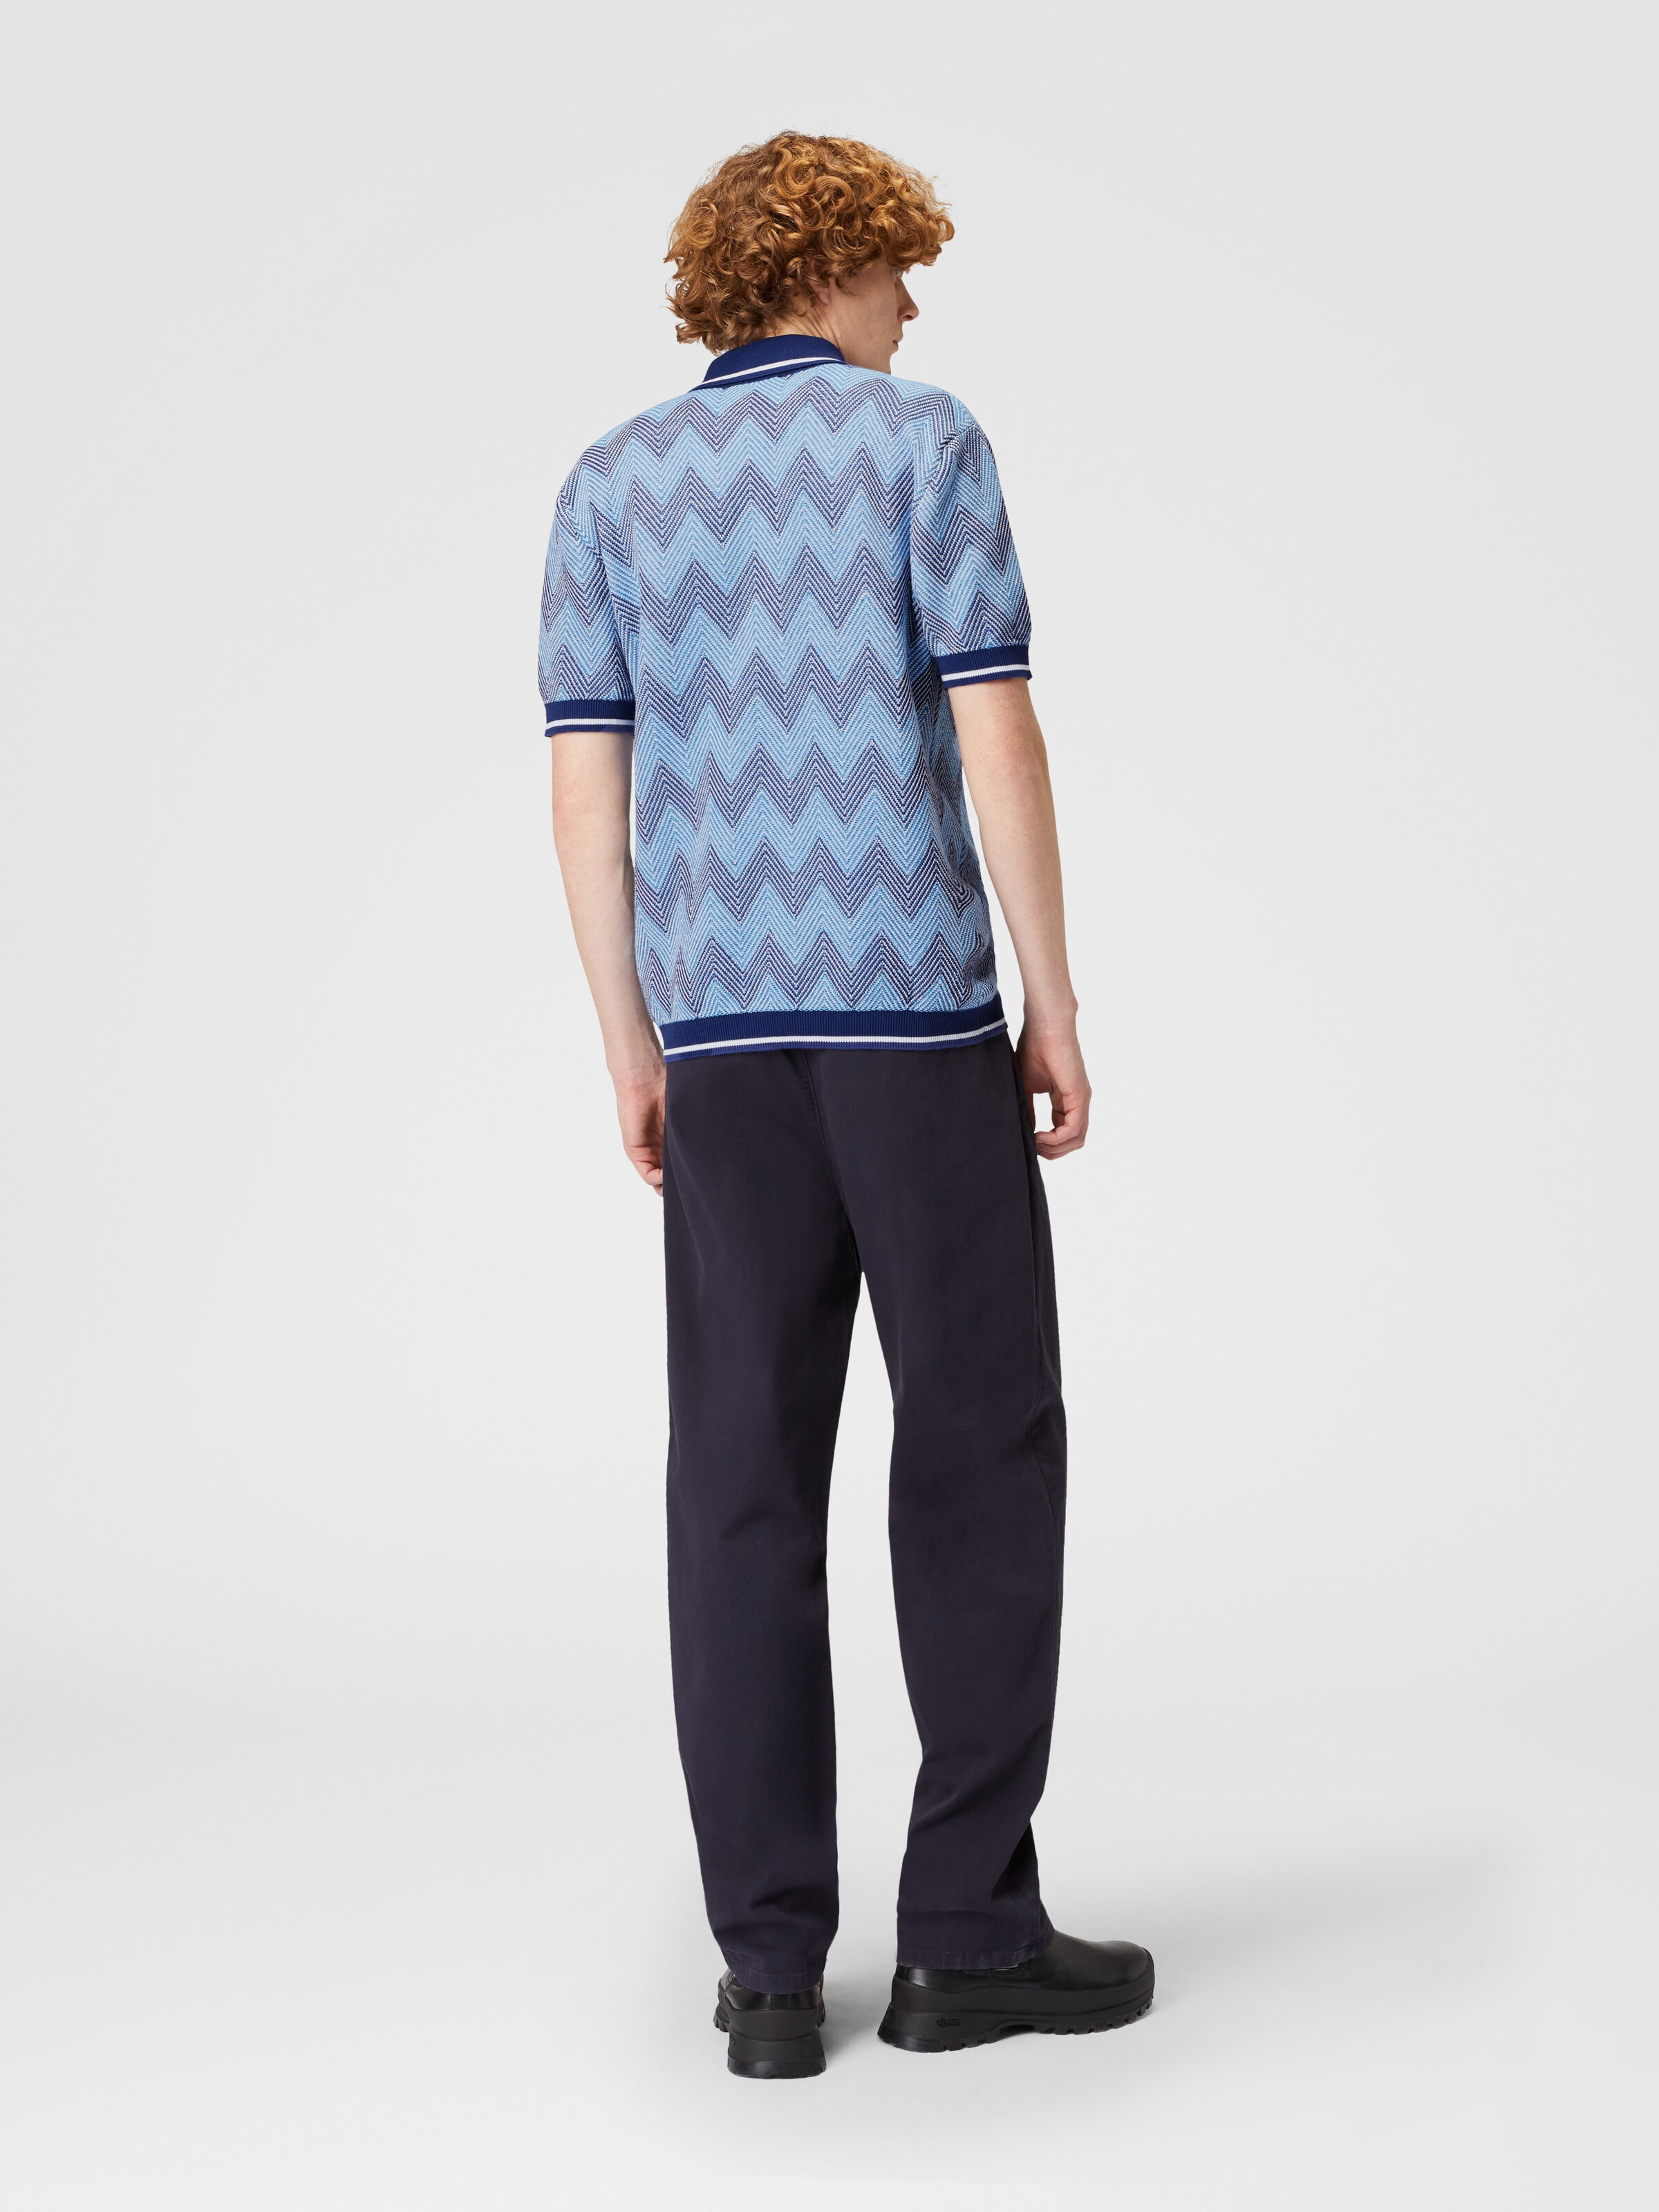 Short-sleeved polo shirt in zigzag cotton with contrasting trim, Blue - 2